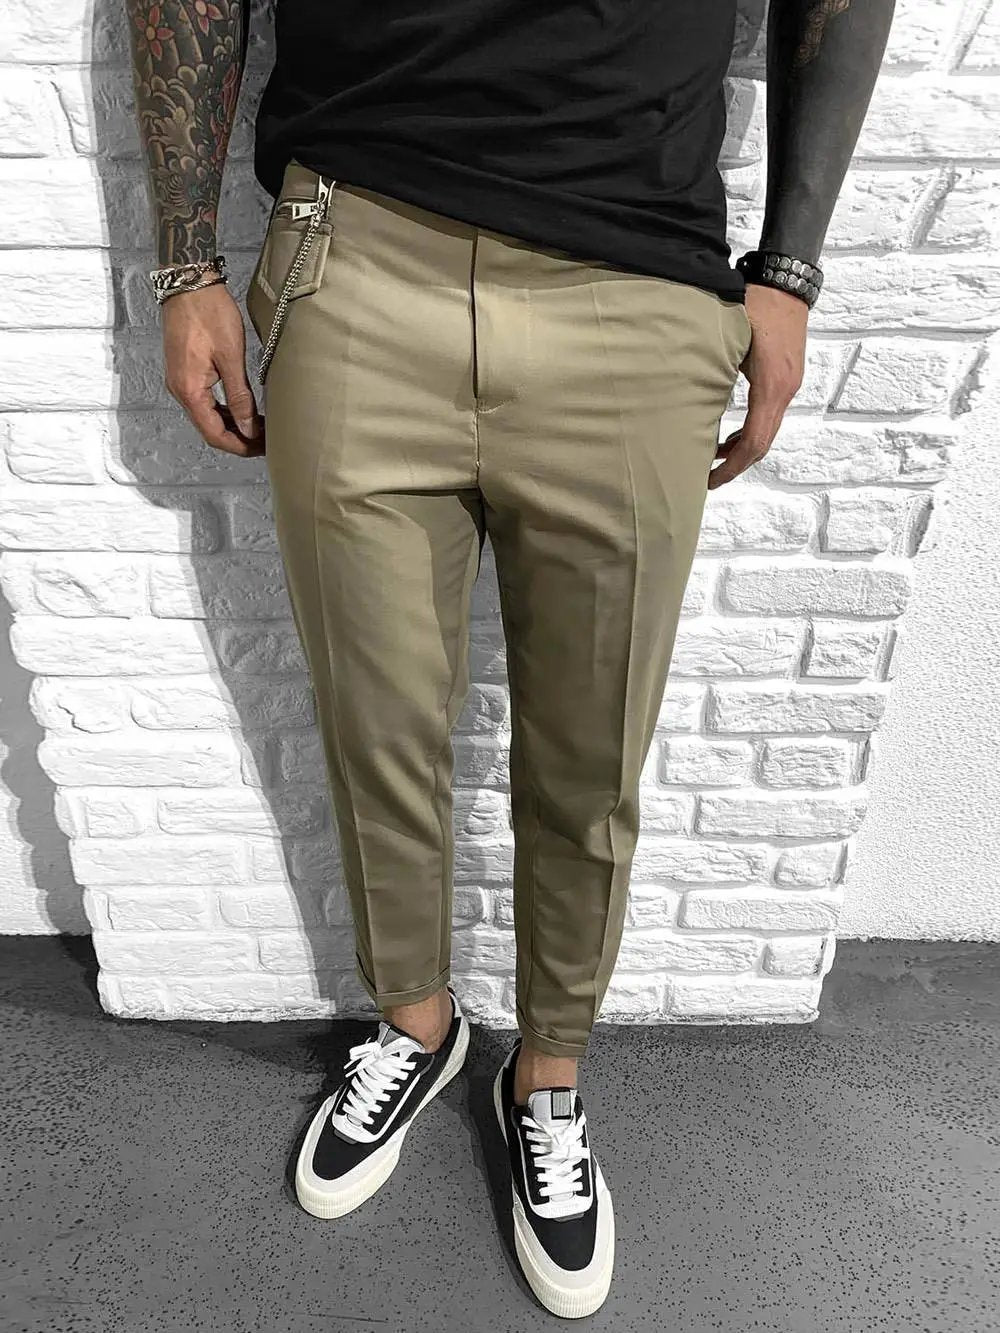 A man with tattoos and khaki pants is standing next to a Gentleman's Roll Up.